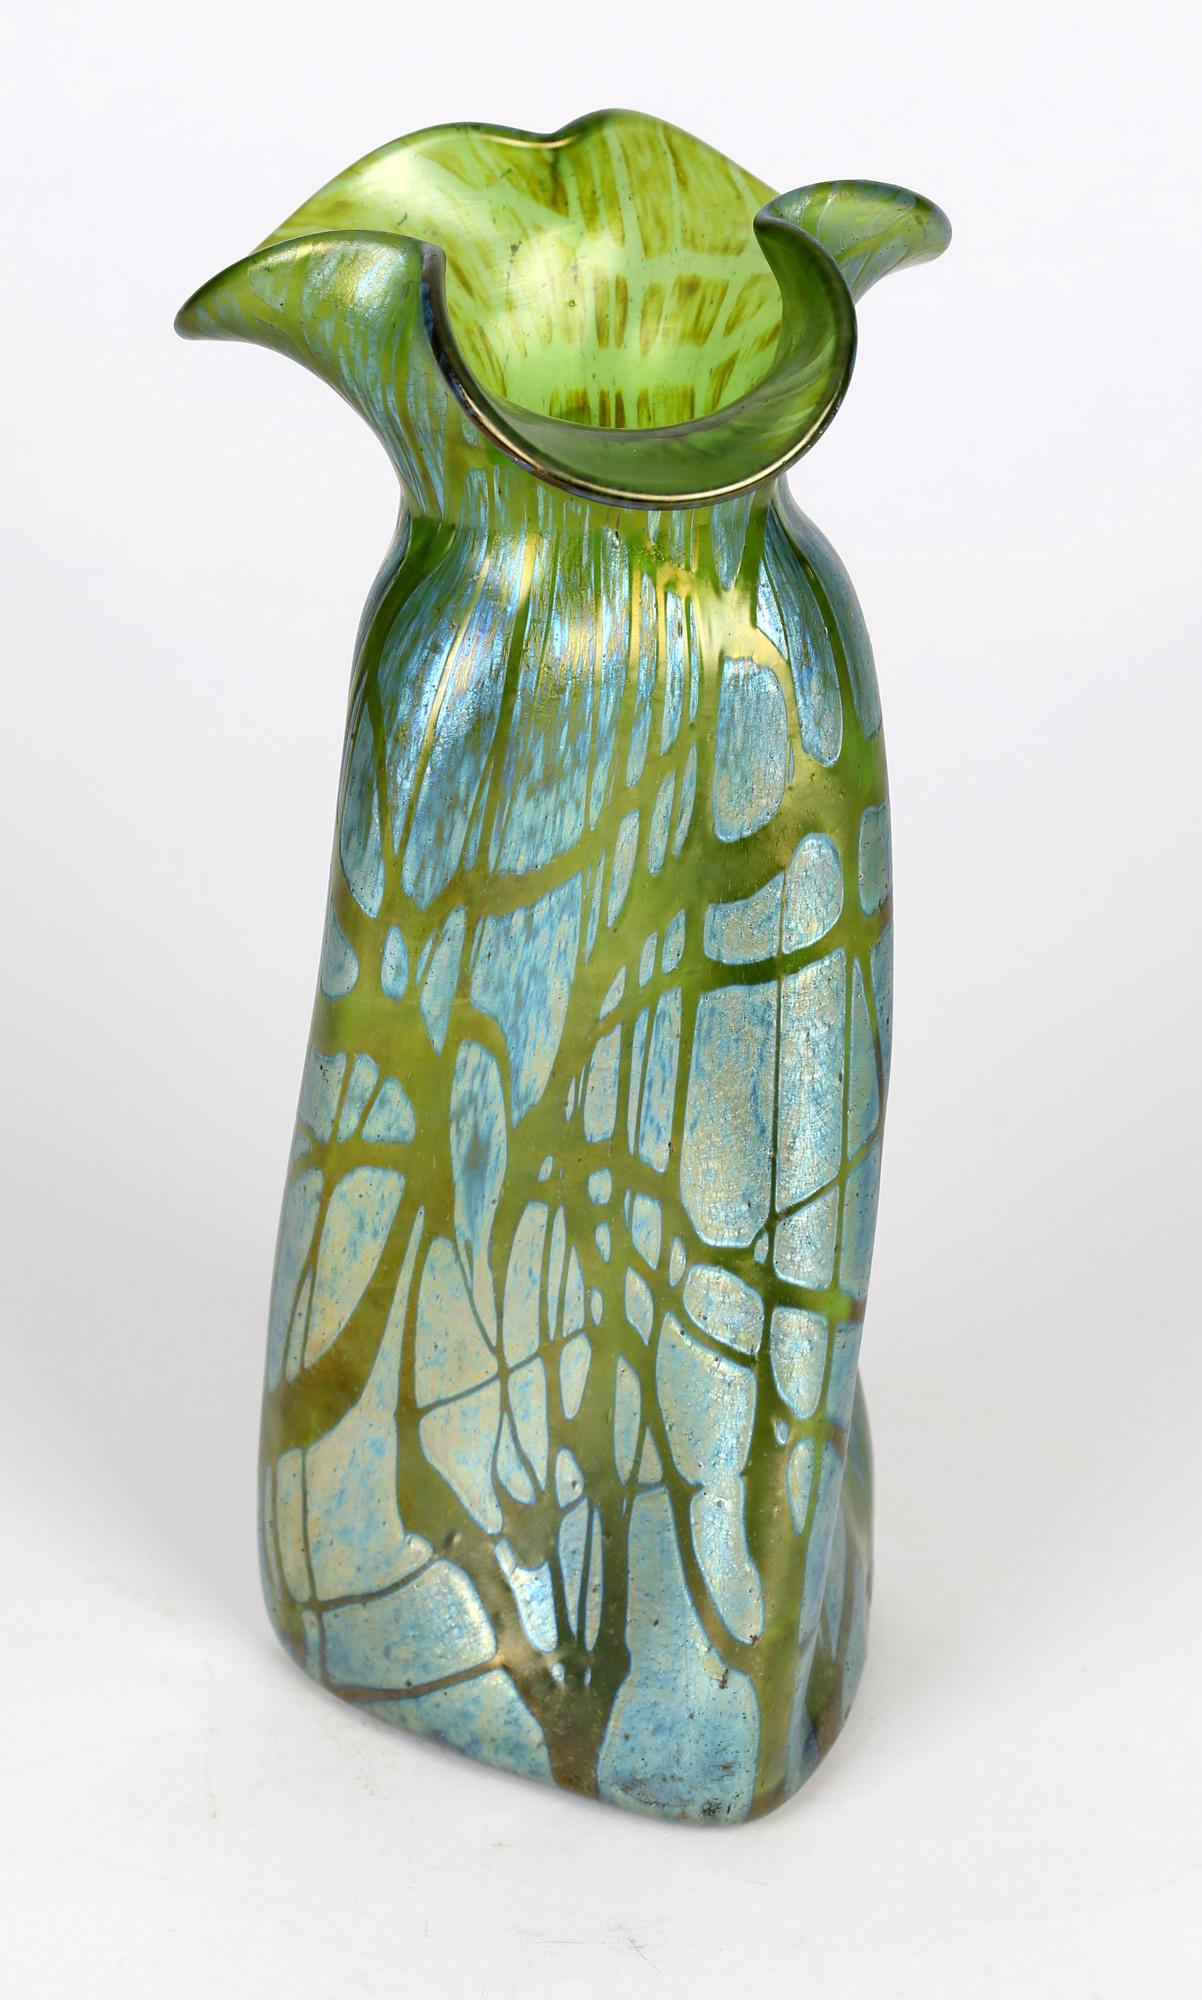 A large Austrian Art Nouveau iridescent green glass vase in abstract 'papillon' design by Loetz and dating from around 1900. The vase is of triangular shape with a spiral or propeller design narrowing to a tricorn pinched flower shaped top. The